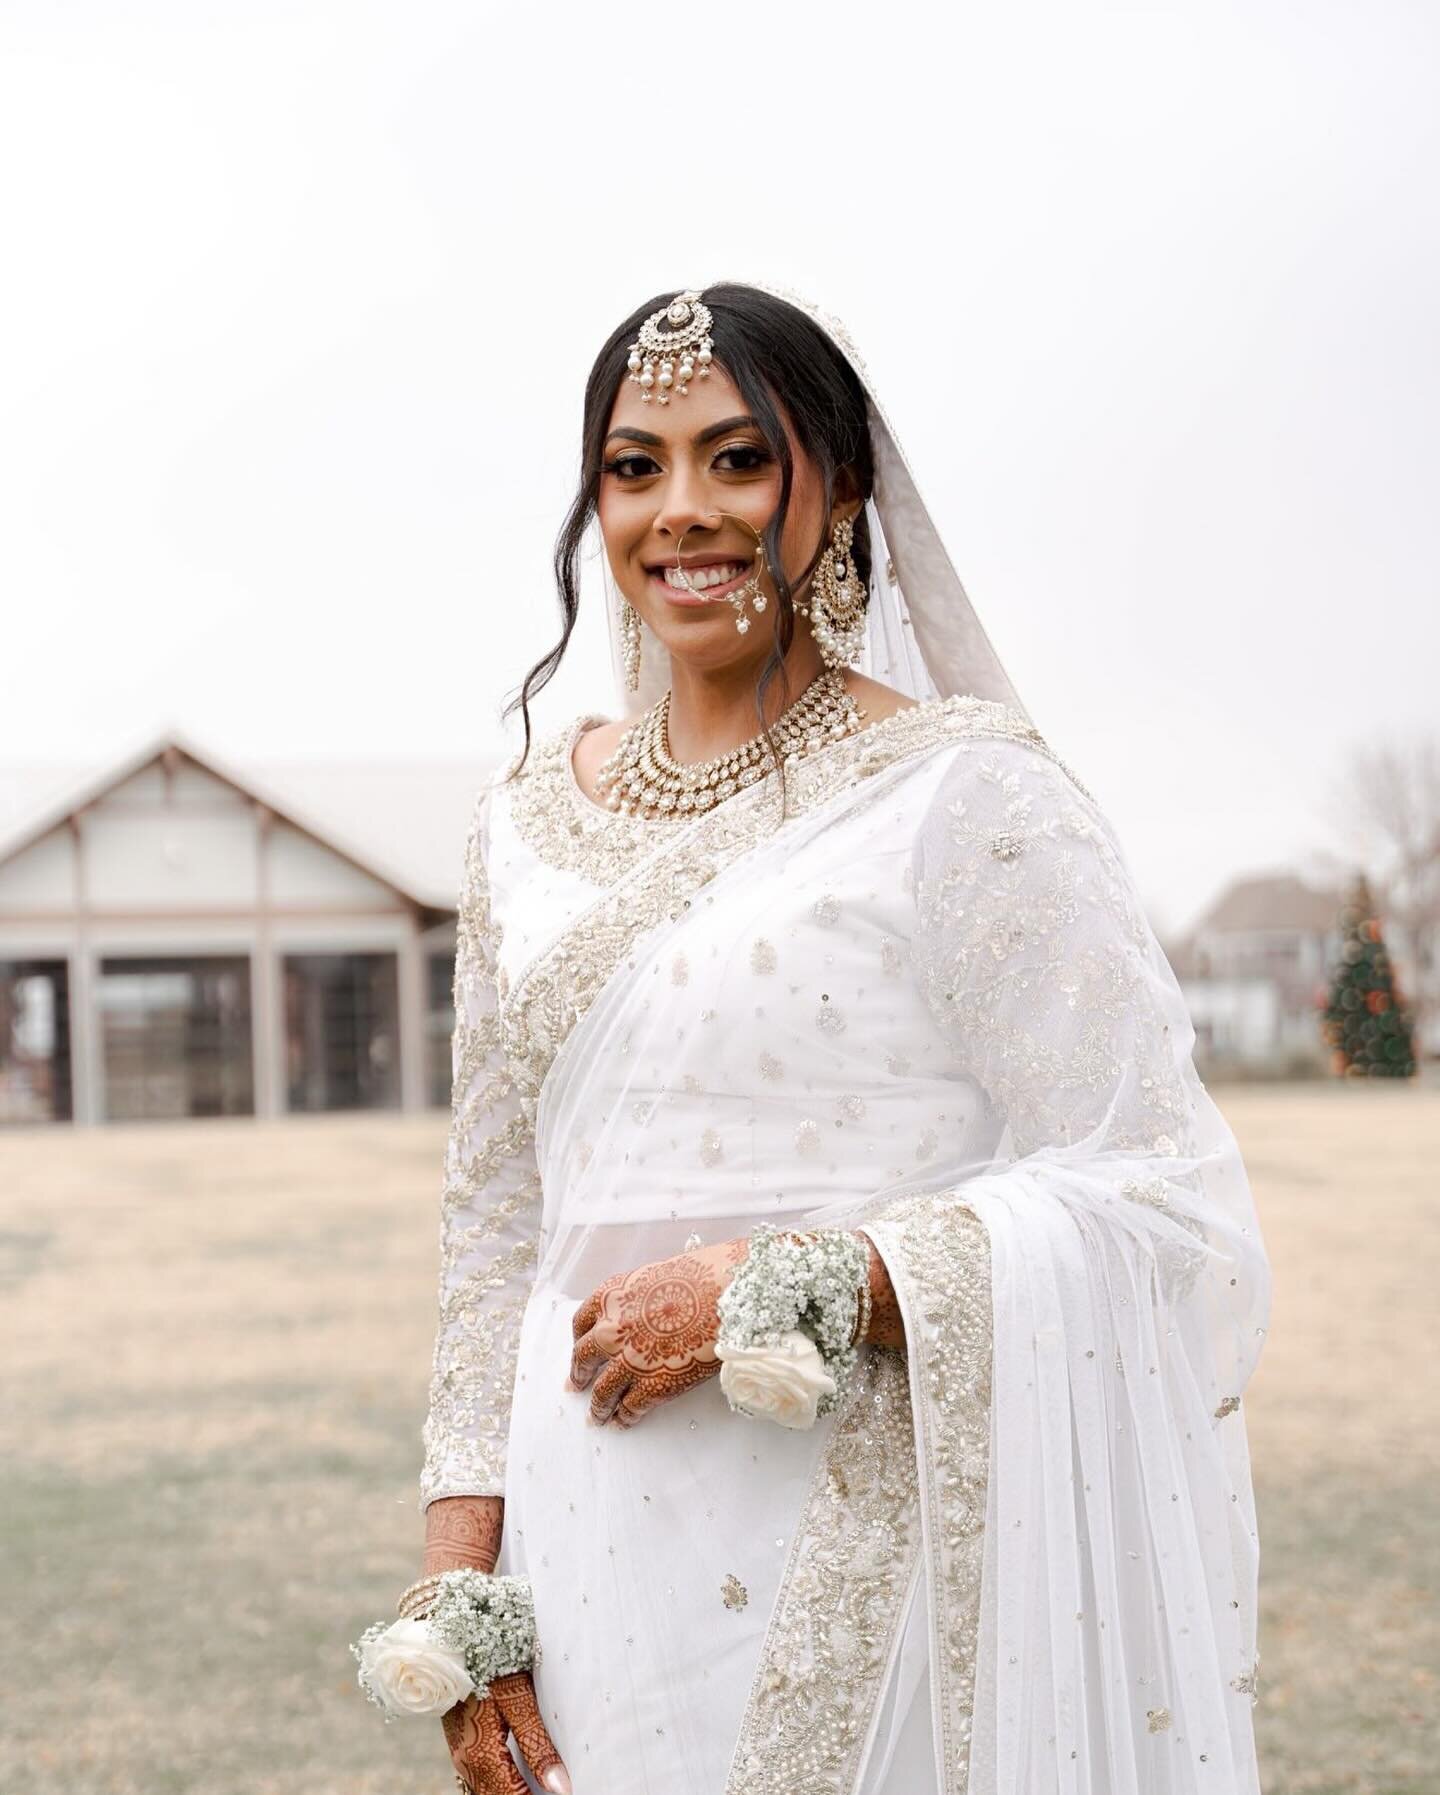 A moment for the bride 🦢✨

.

HMUA: @getthelookbyneha 
Photography: @black.iris.photos
Videography: @ramiz.prod
Decor: @_dtevents.usa 

.

Limited availability for 2024 &bull; Inquire today for our latest wedding guide 🖤

.
.
.

#weddingphotographe